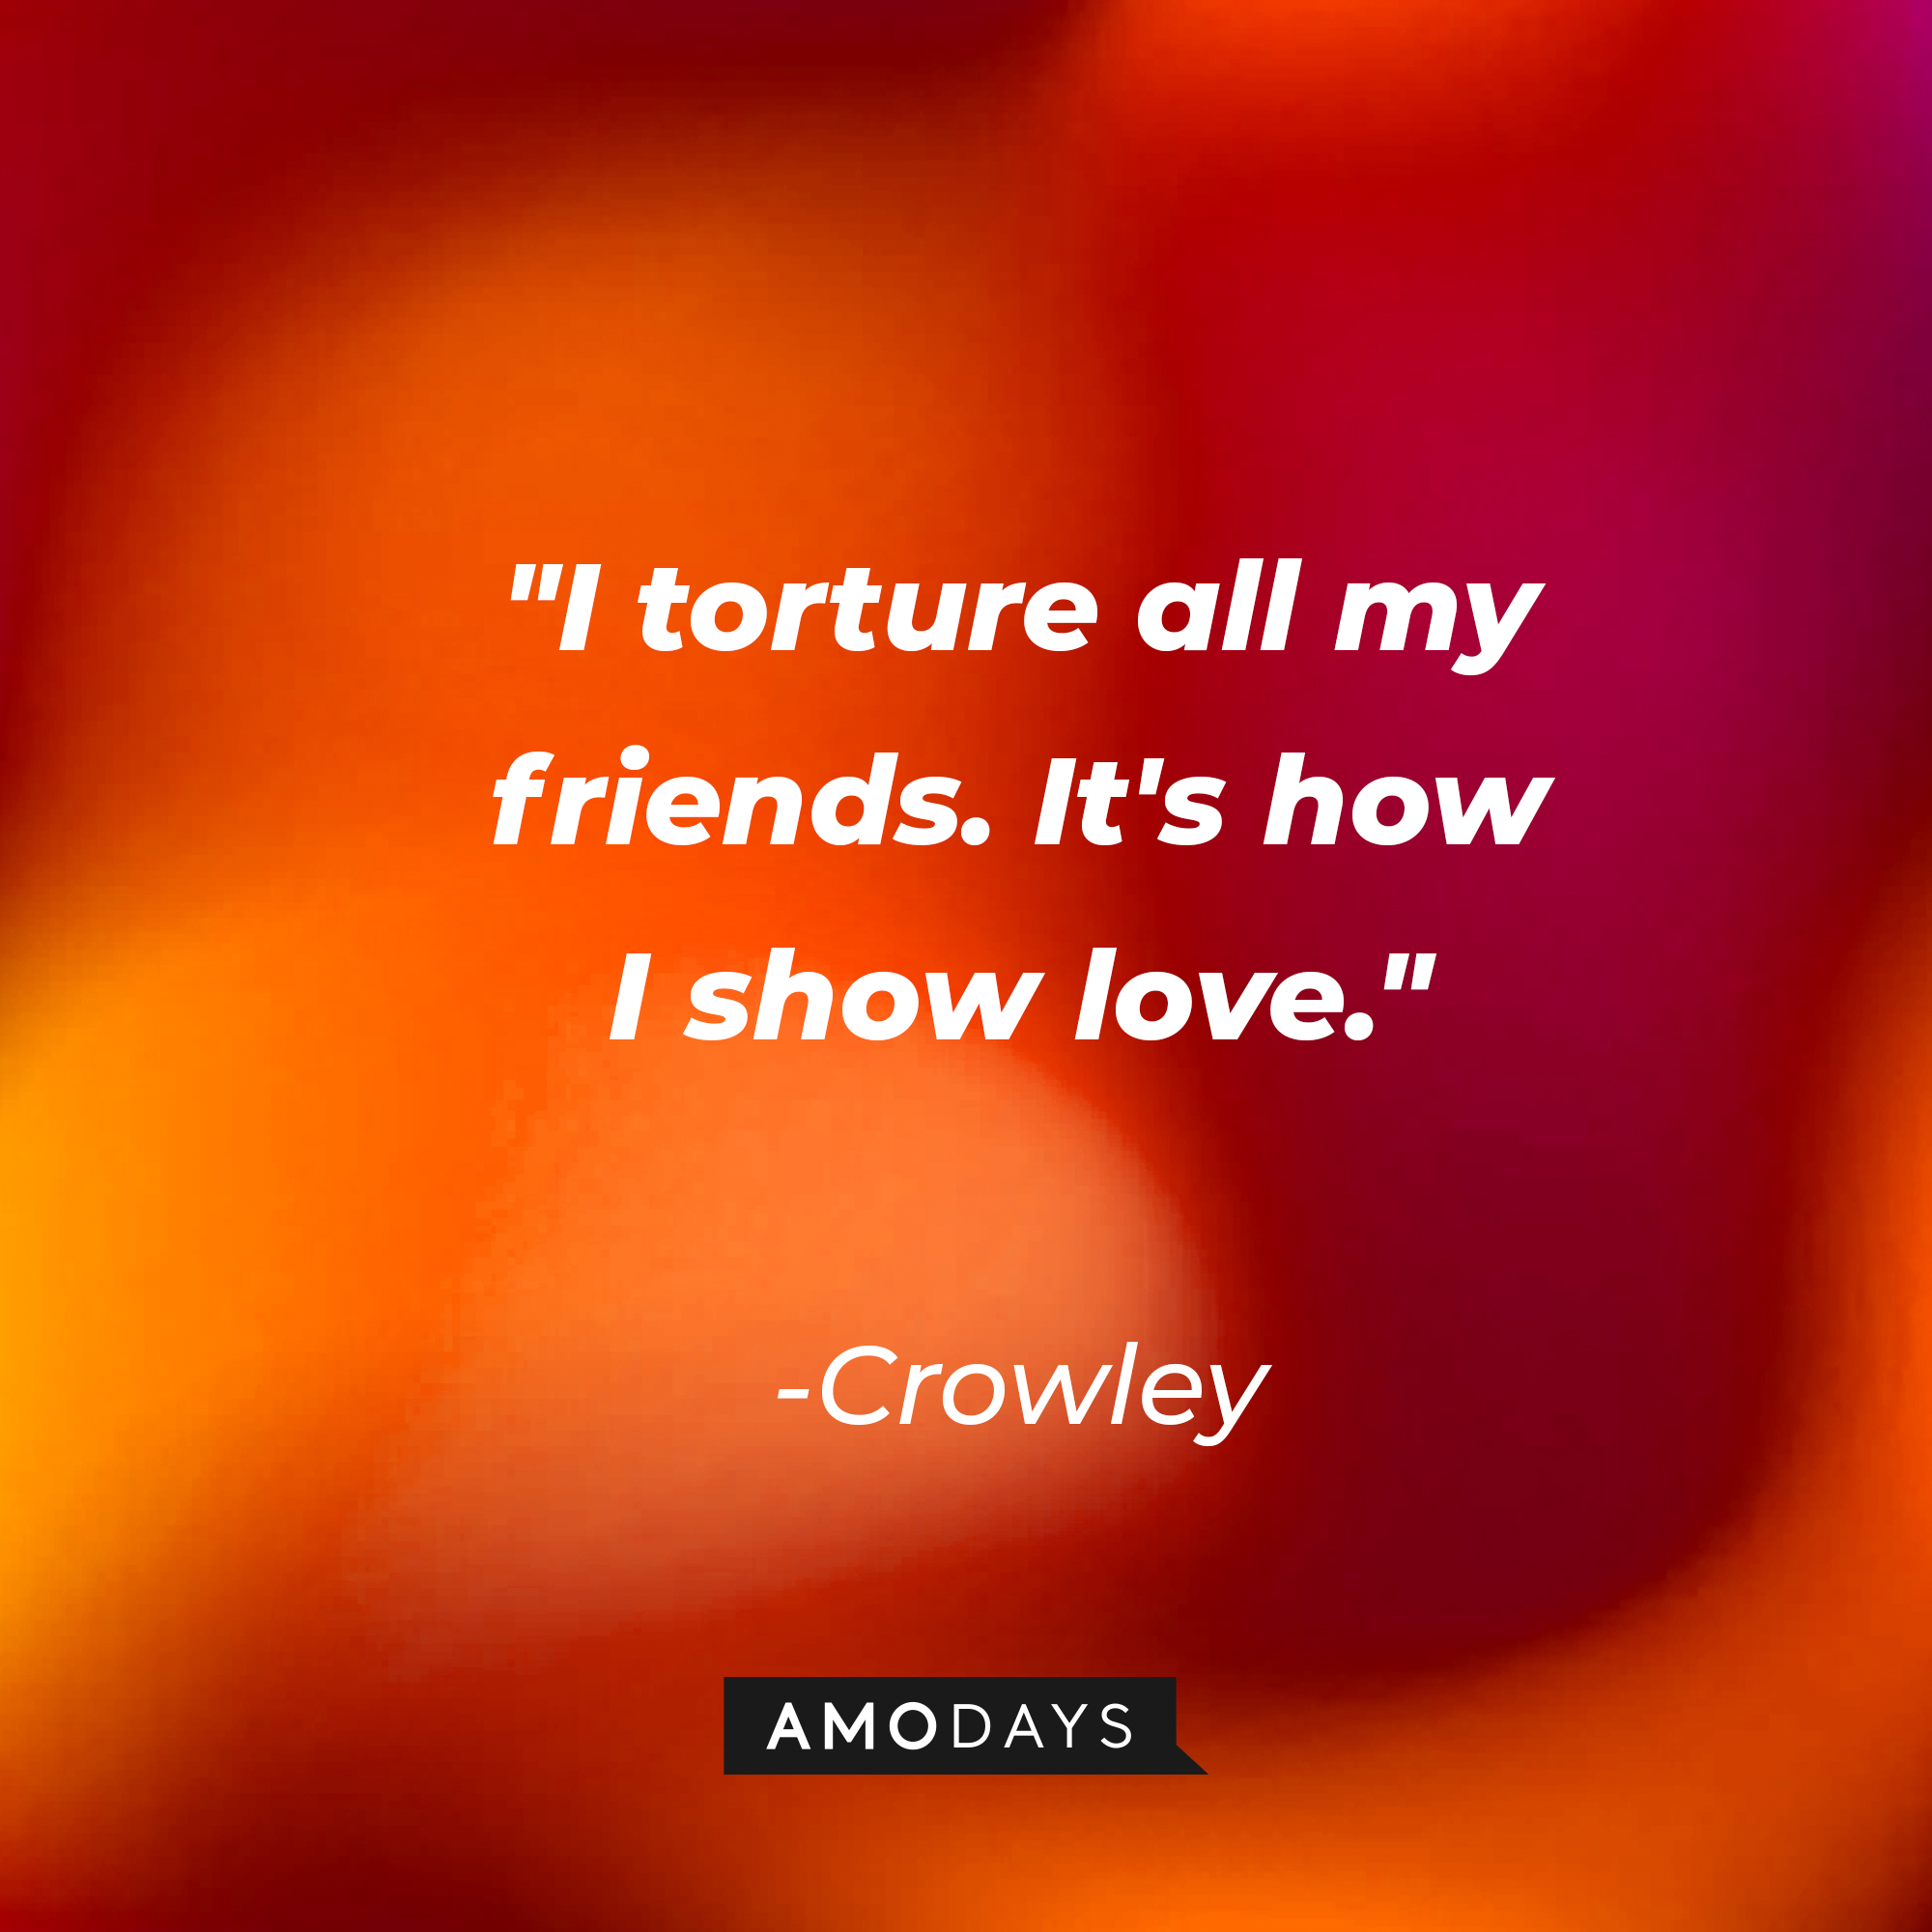 Crowley’s quote: "I torture all my friends. It's how I show love." | Source: AmoDays